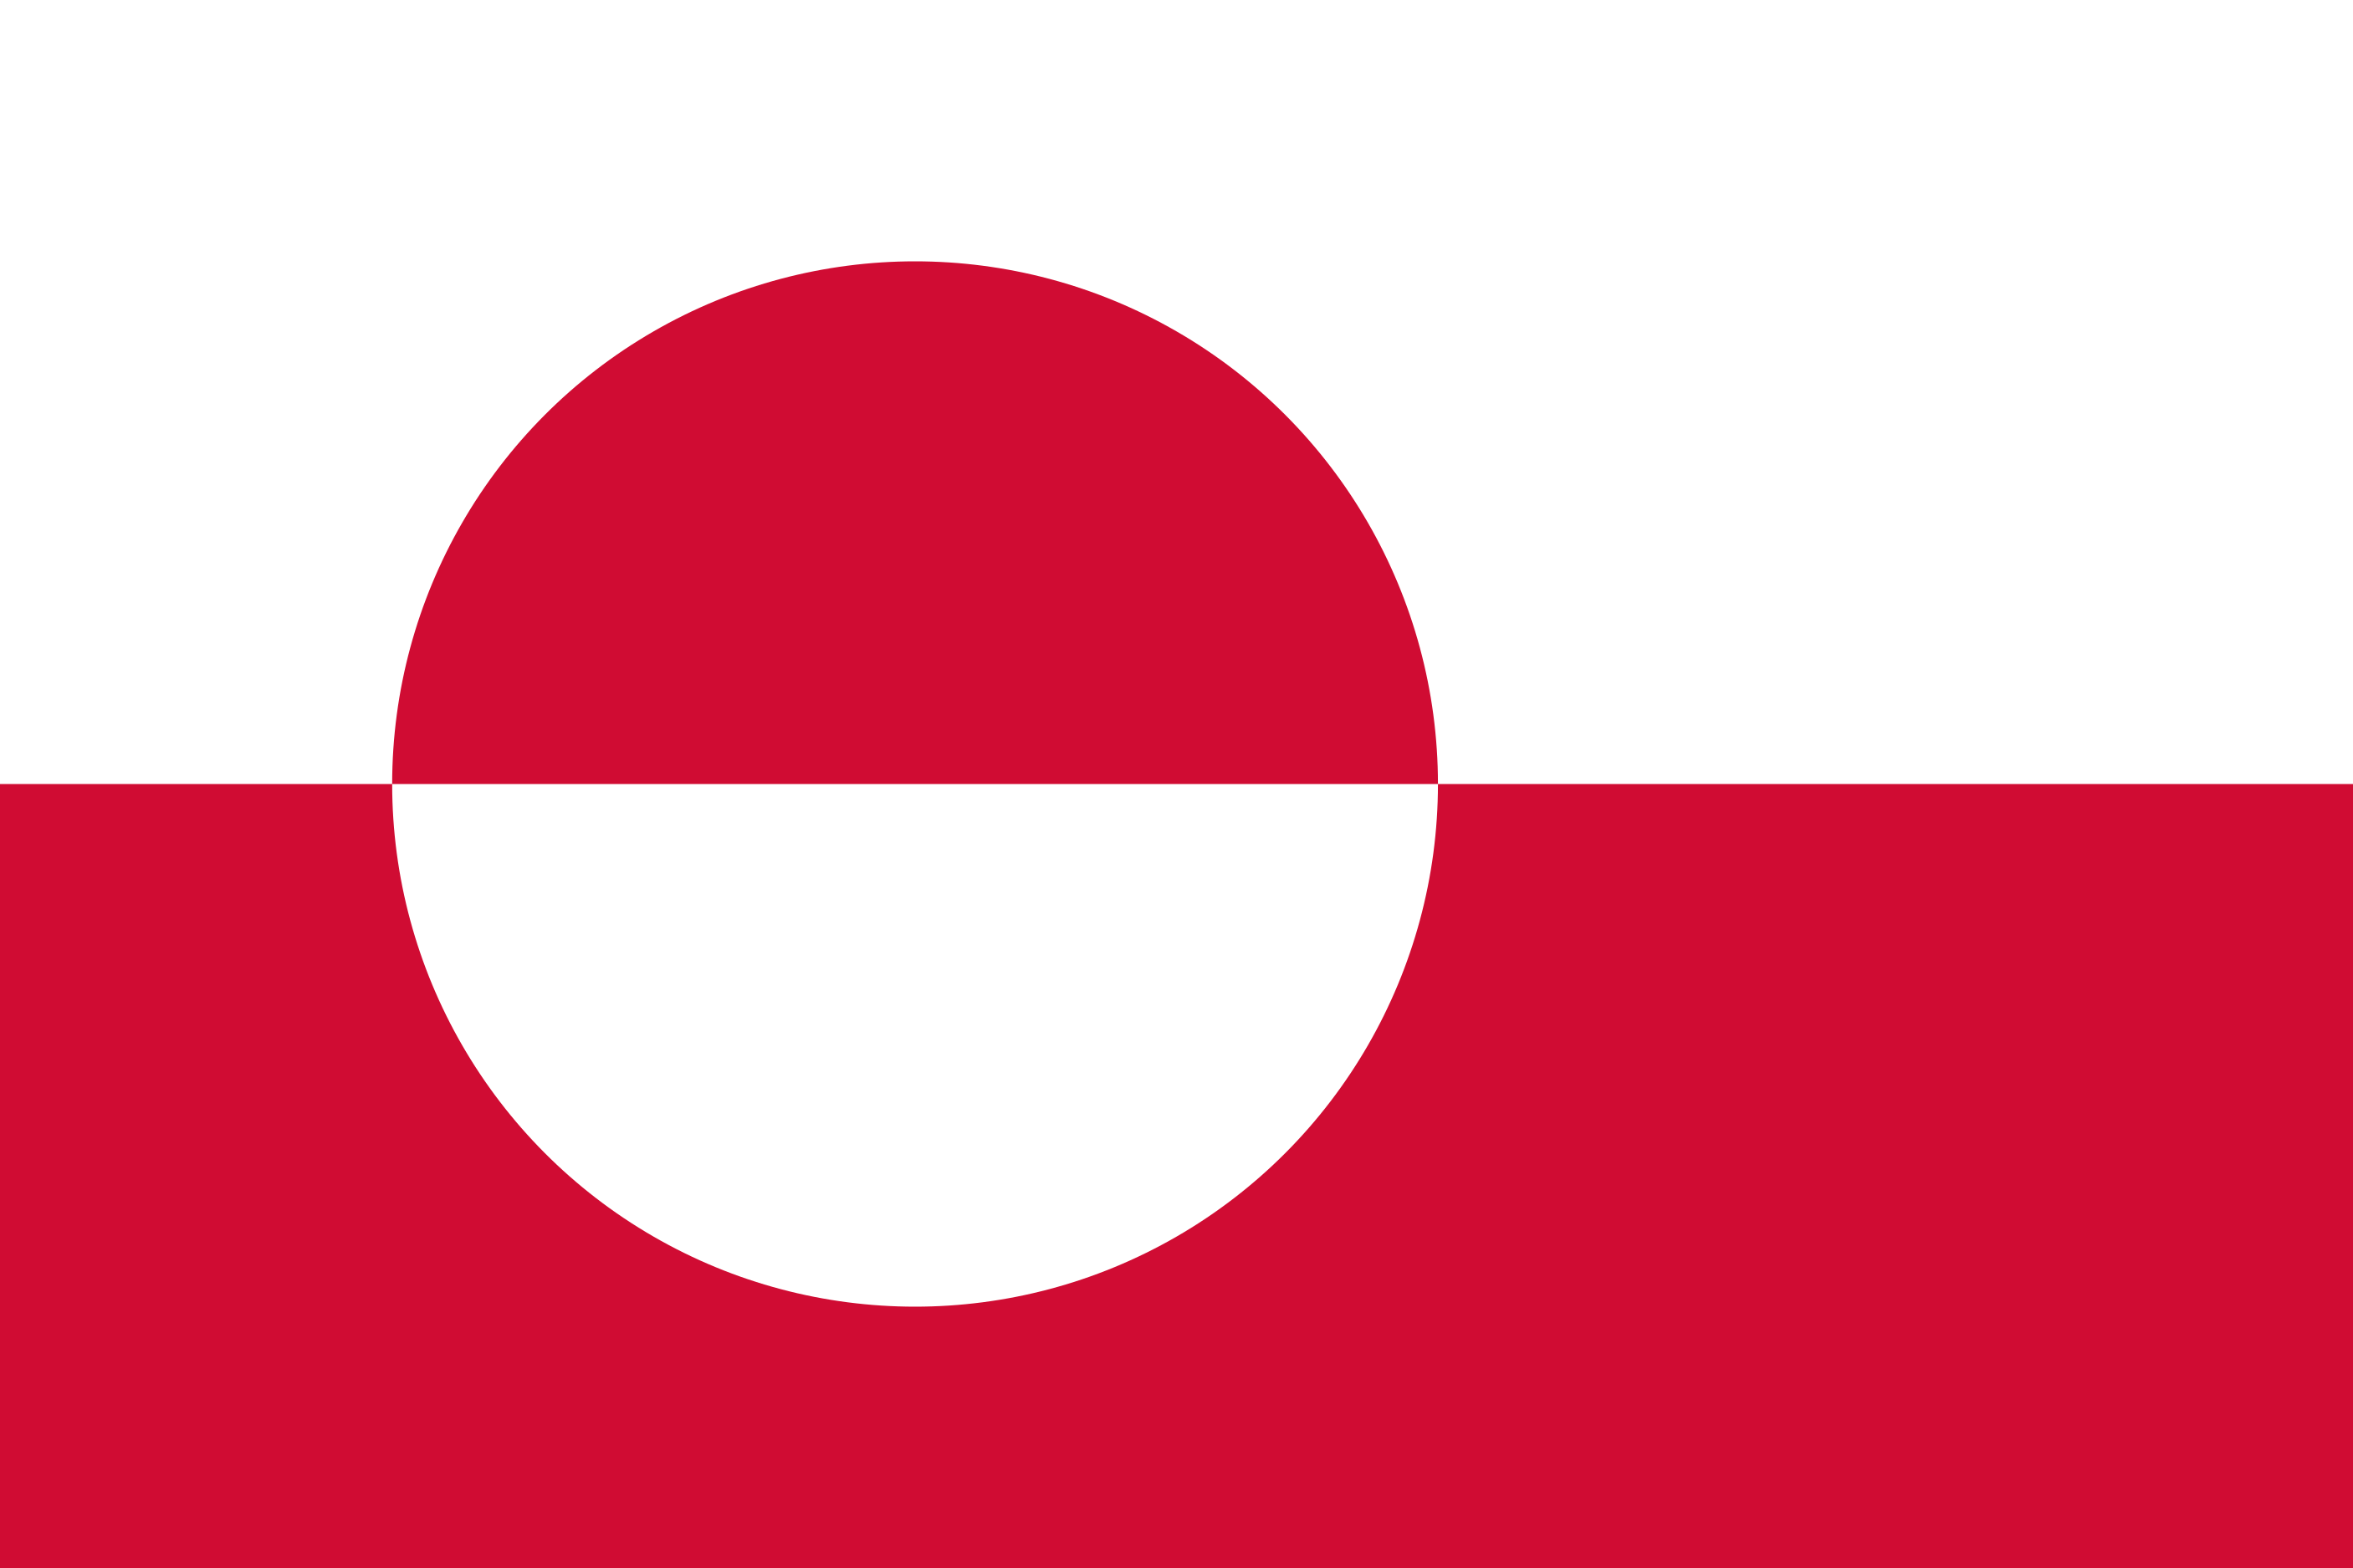 Free Greenland Flag Documents: PDF, DOC, DOCX, HTML & More!